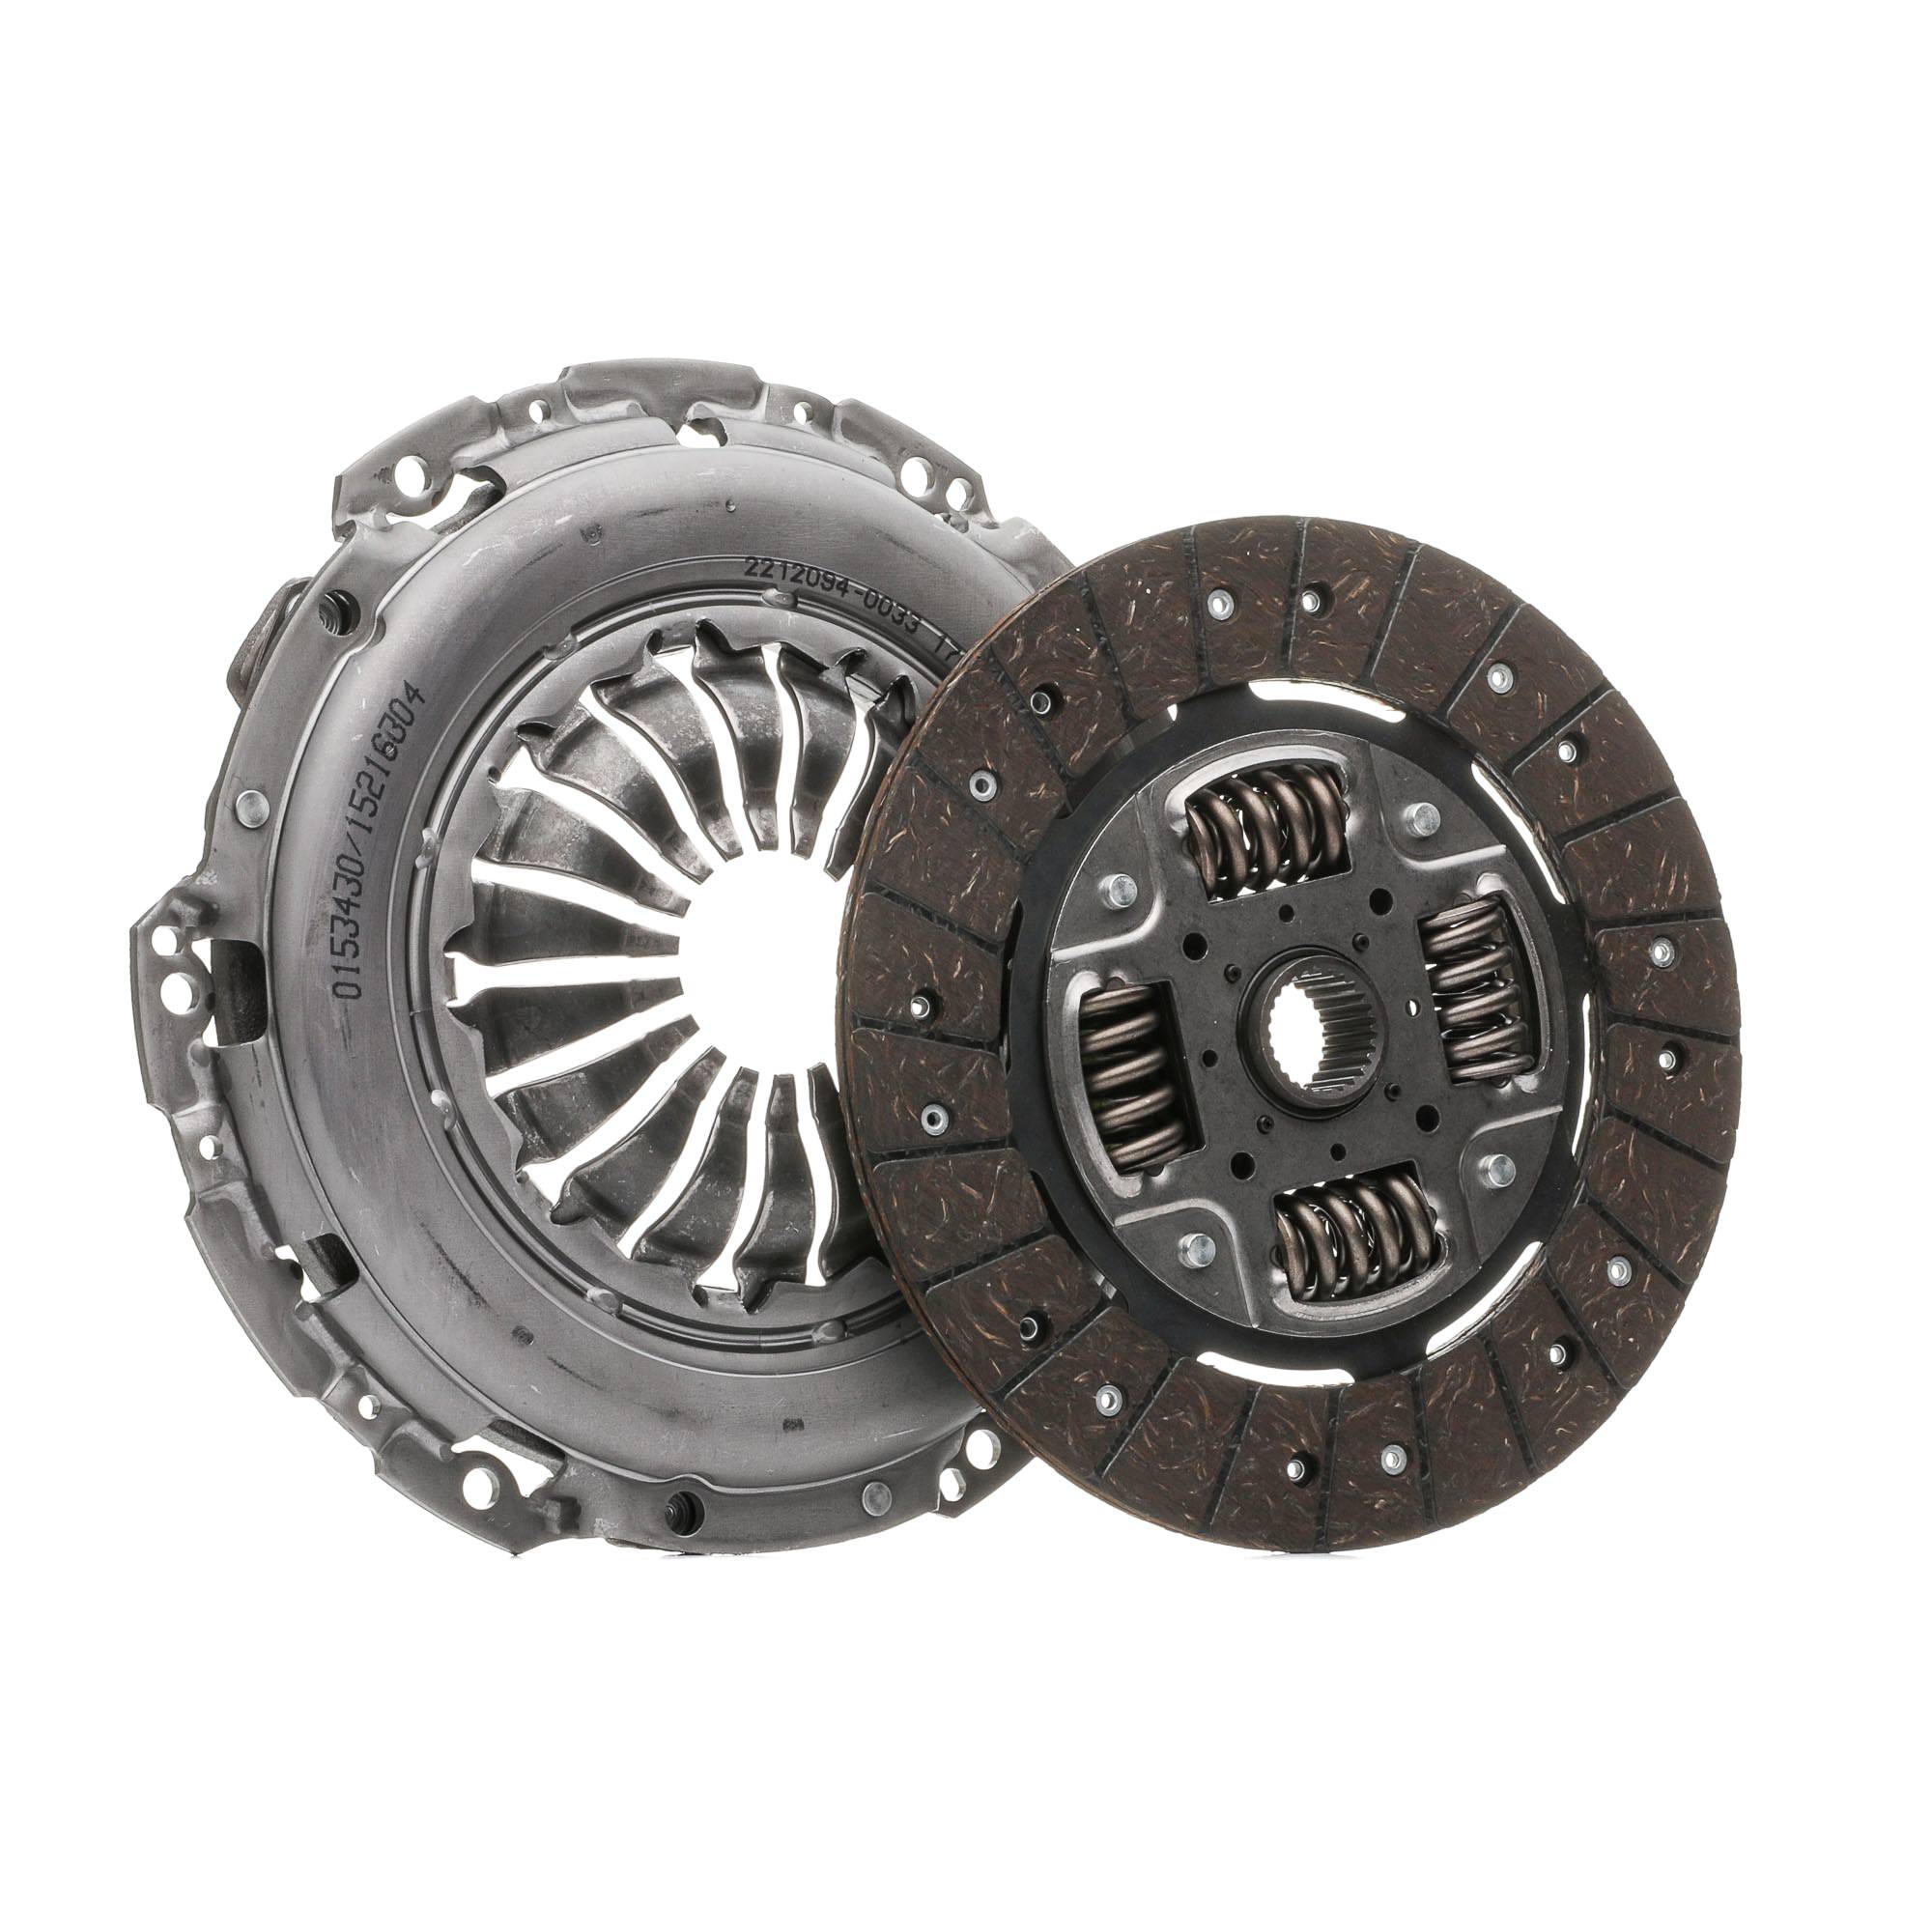 SKCK-0100317 STARK Clutch set MERCEDES-BENZ for engines with dual-mass flywheel, with clutch pressure plate, with clutch disc, without clutch release bearing, Requires special tools for mounting, Check and replace dual-mass flywheel if necessary., with automatic adjustment, 240mm